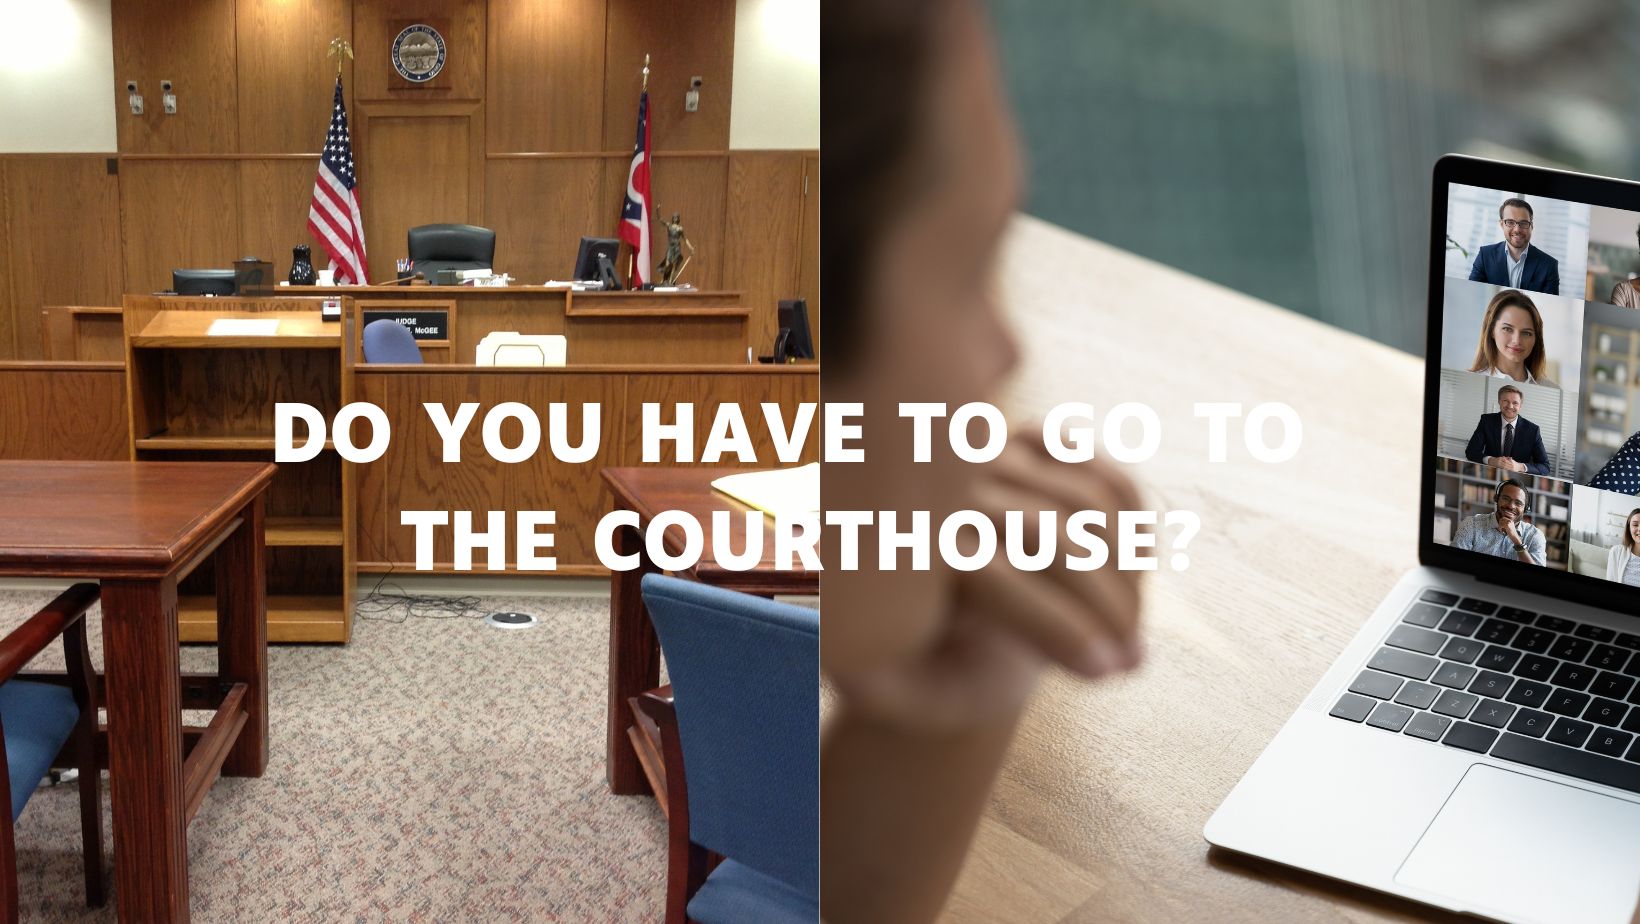 Appearing for court via zoom or at the courthouse is something your lawyer should tell you. If you are facing a DUI charge, it depends where you were charged with a crime as to whether you have to go to court or can appear on your phone or computer.
Attorney Ryan Witt
Witt Law Group PS